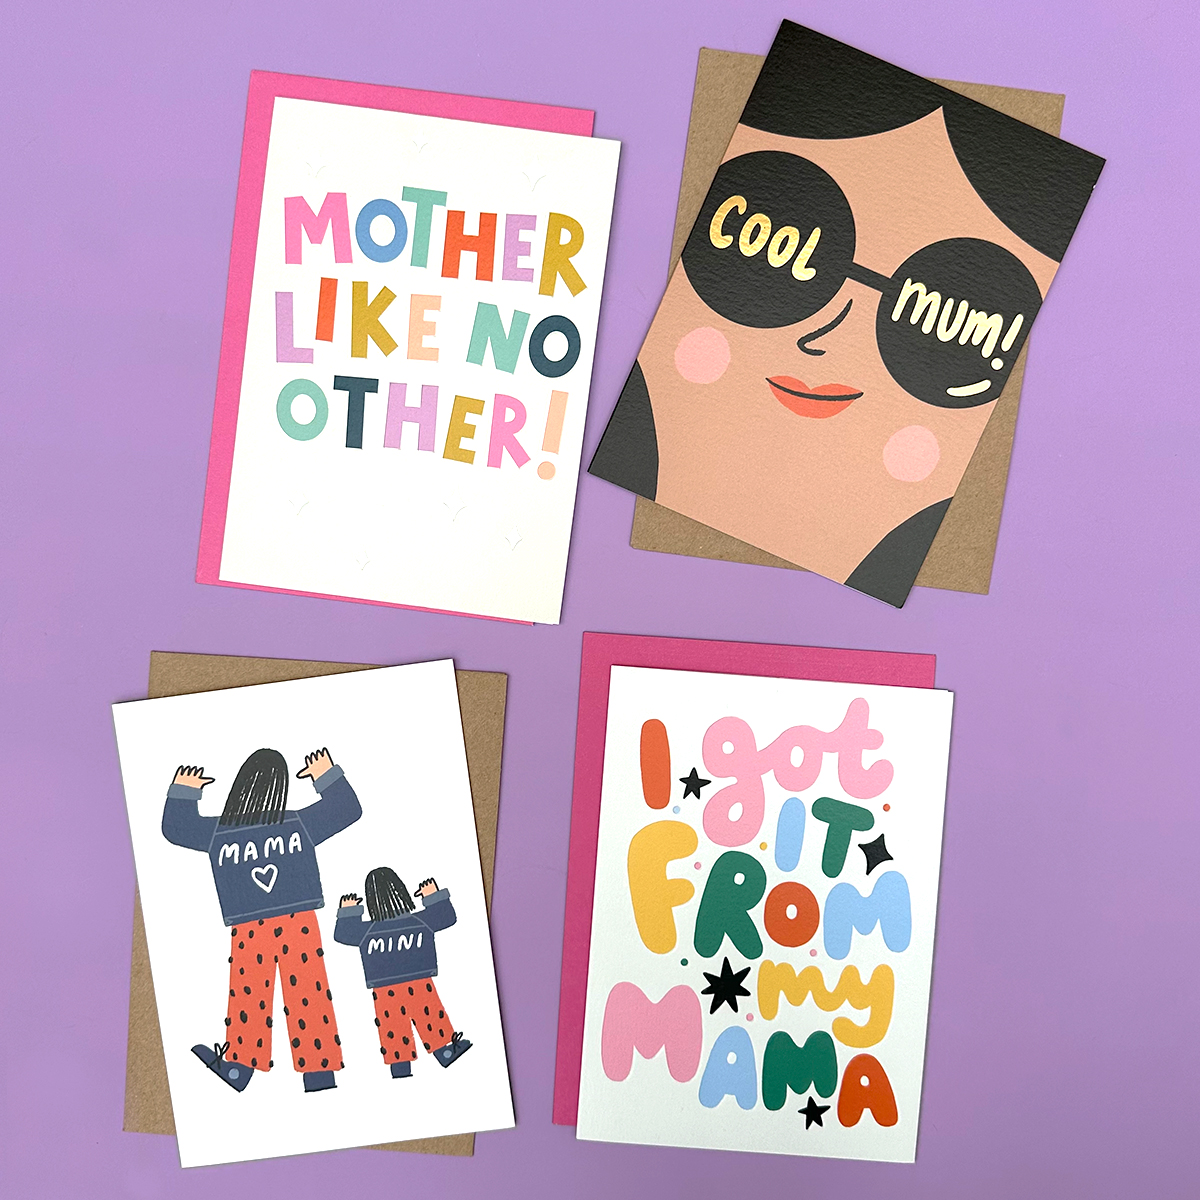 If your Mum 'isn't a regular Mum, she's a cool Mum' 💁‍♀️ be sure to tell her with a card 'that's so fetch' on Mother's Day! #motherscard #mothersdaycard #coolmum #meangirls #sendacarddeliverasmile